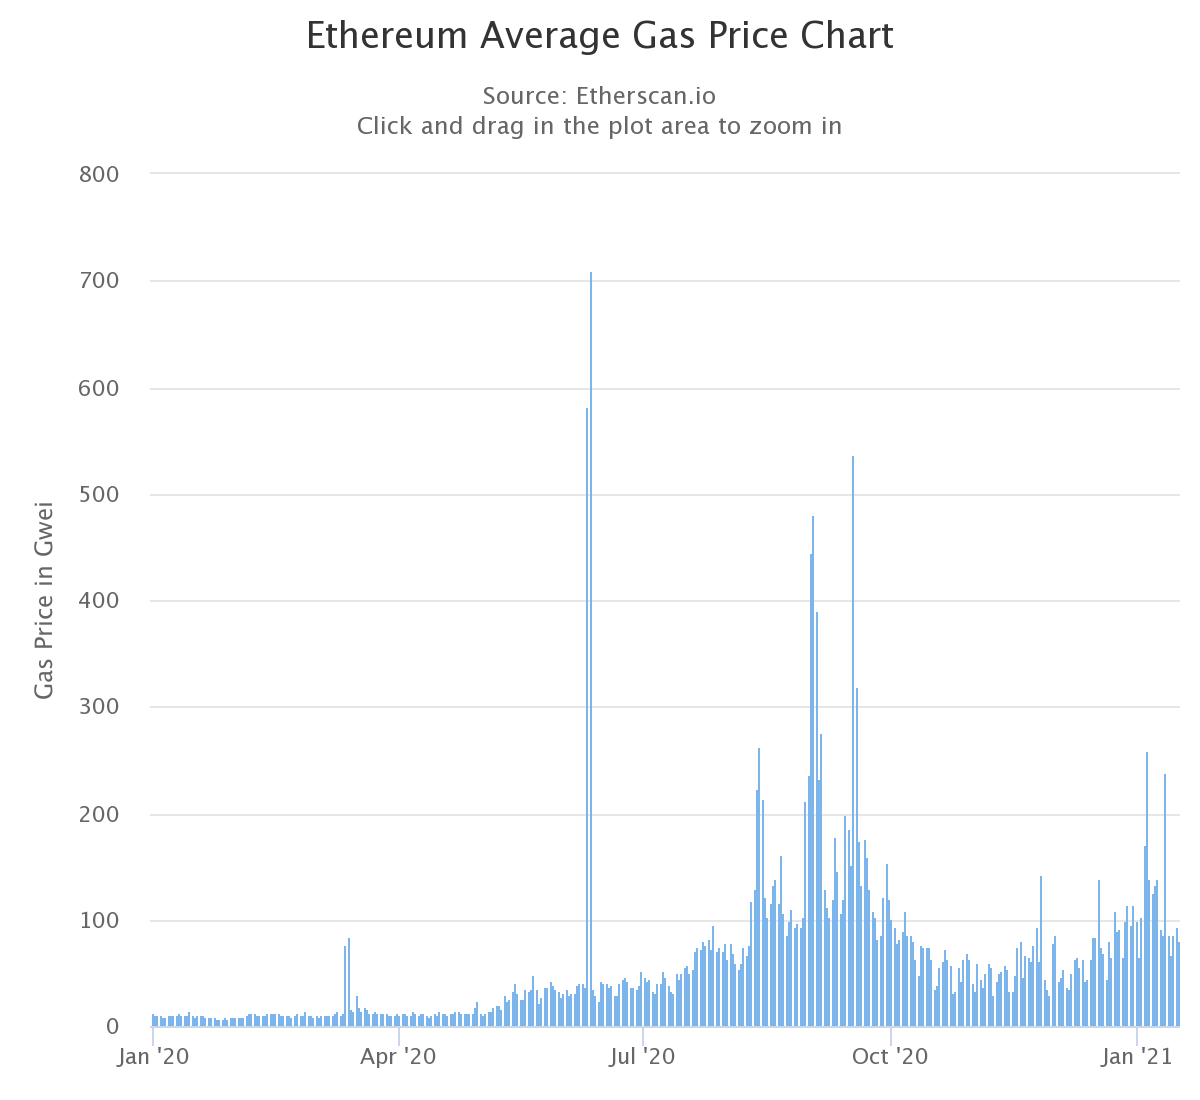 Ethereum average gas fees in 2020. Source: Etherscan